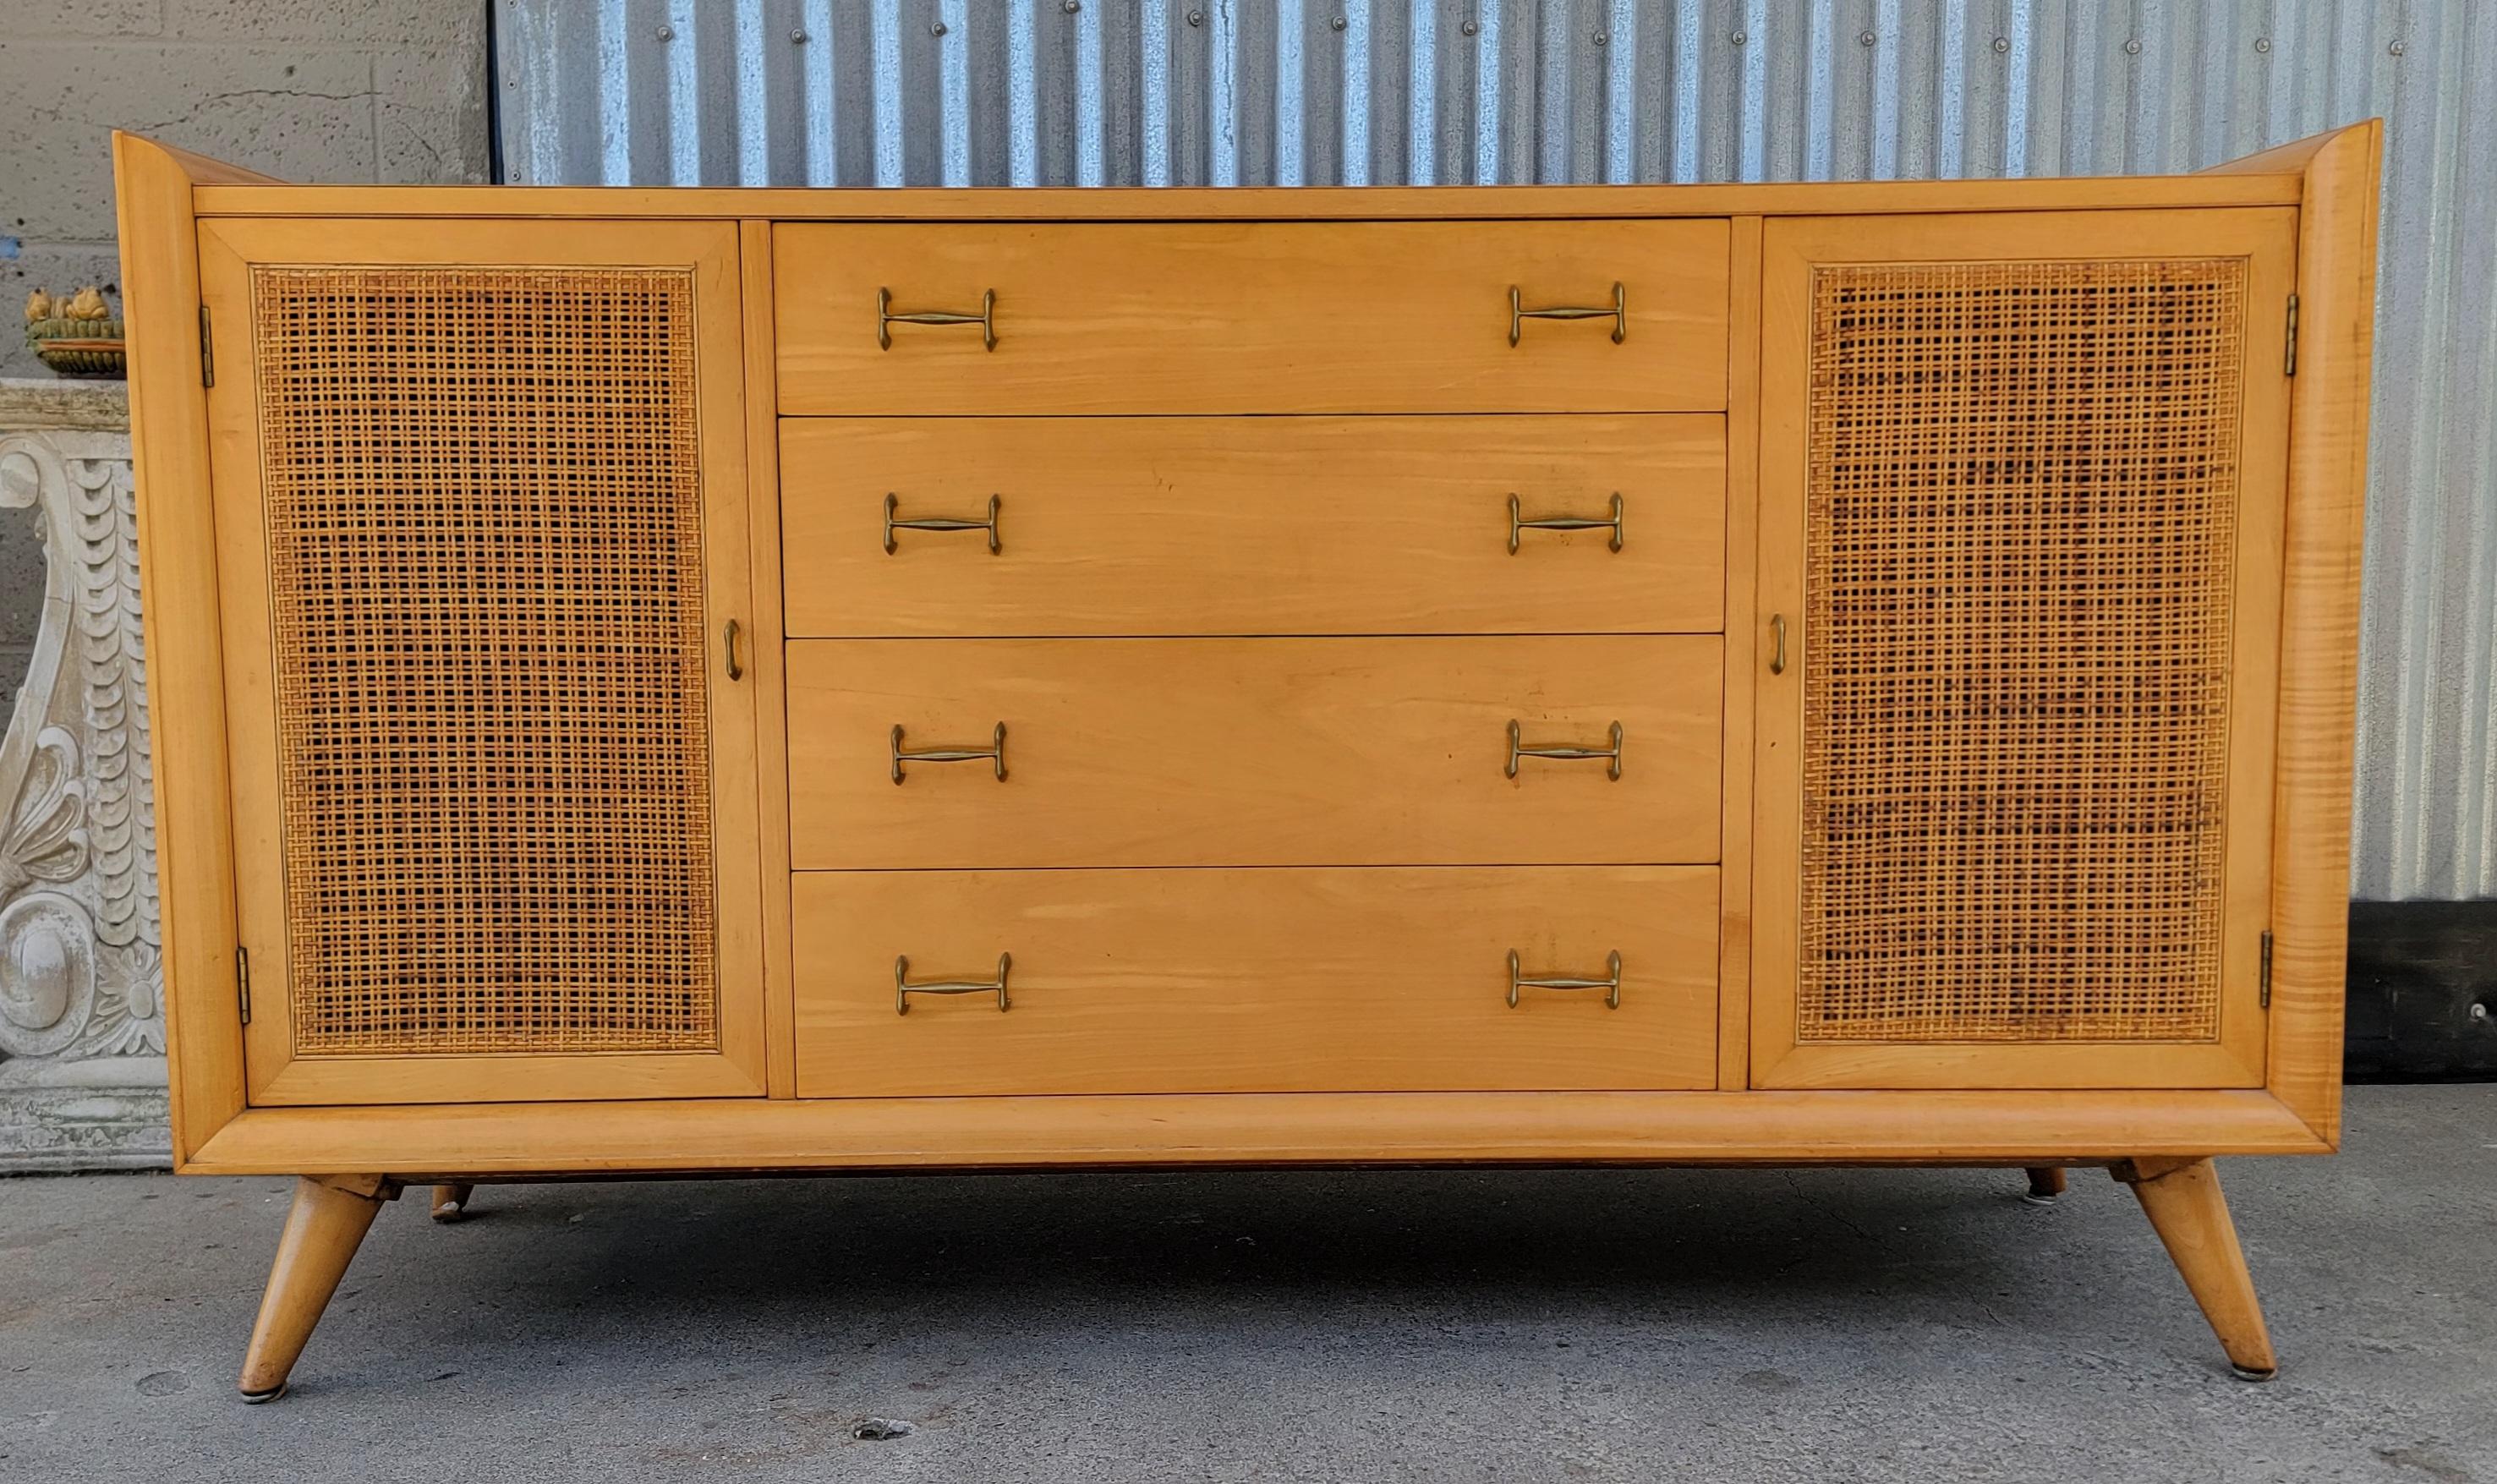 A 1950's Mid-Century Modern blonde credenza with cane door detail. Original condition with a beautiful glow to finish. Unique design in the manner of Paul McCobb. Solid wood materials and dovetail construction. A quality build with ample storage.